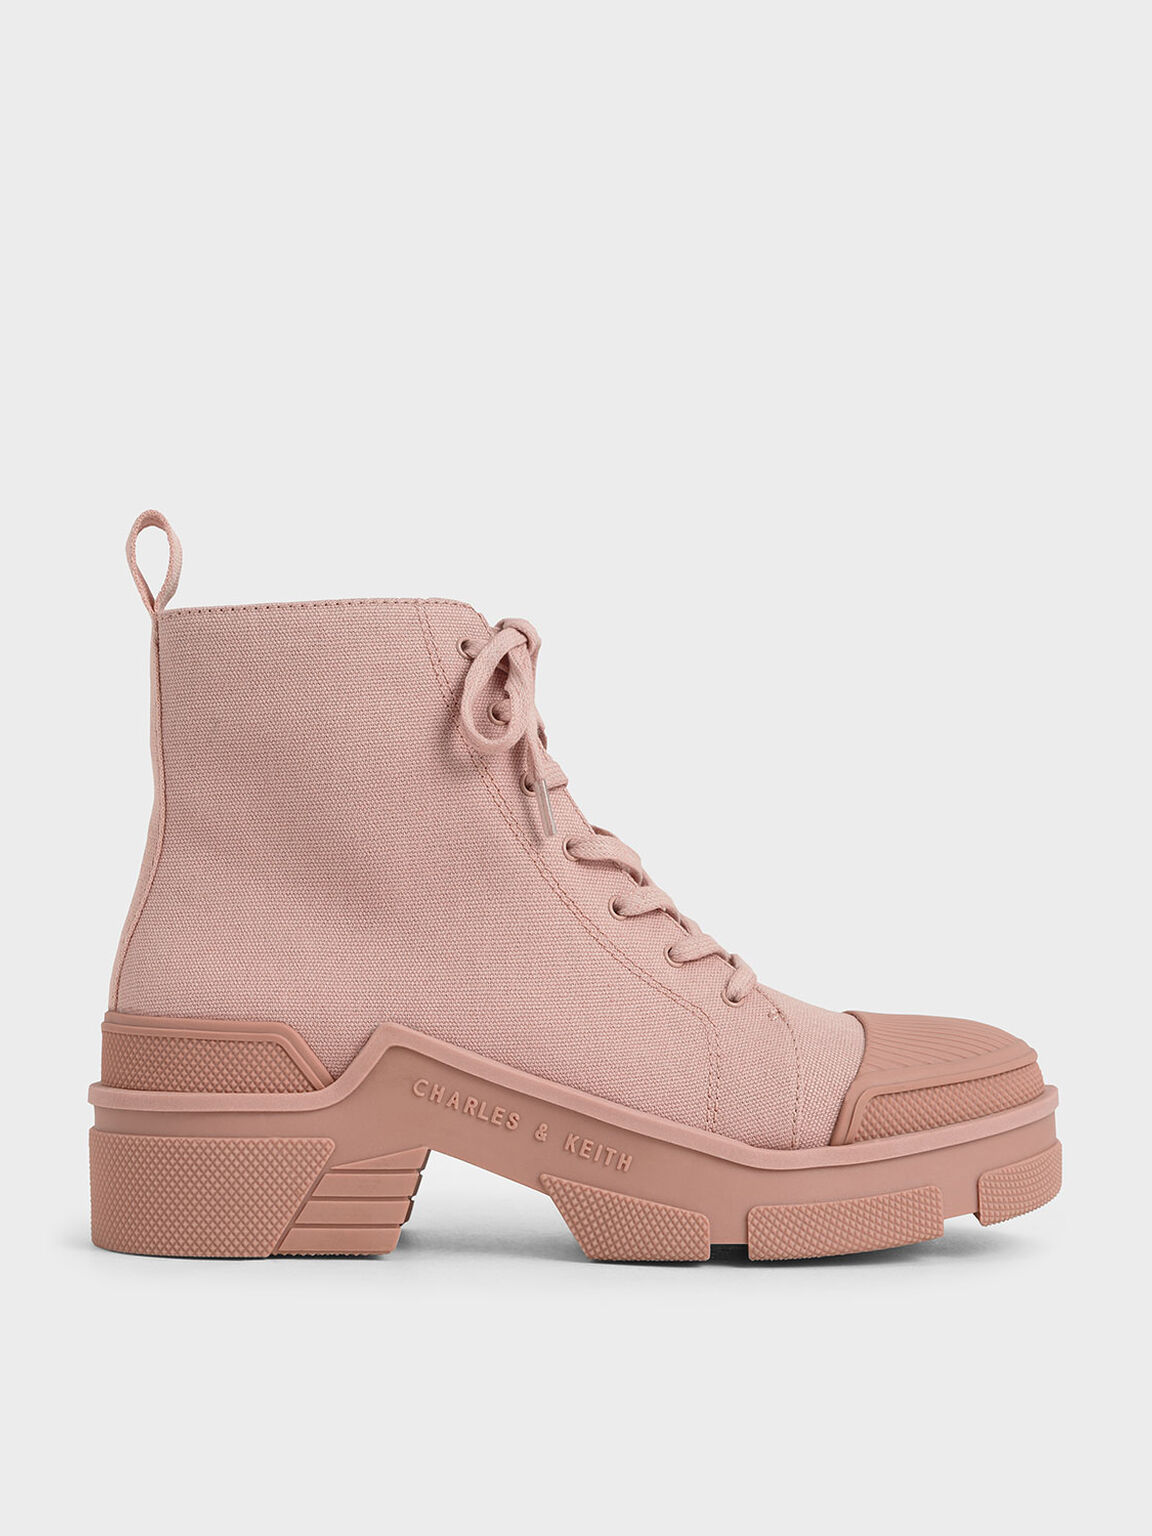 Canvas High Top Sneakers, Light Pink, hi-res